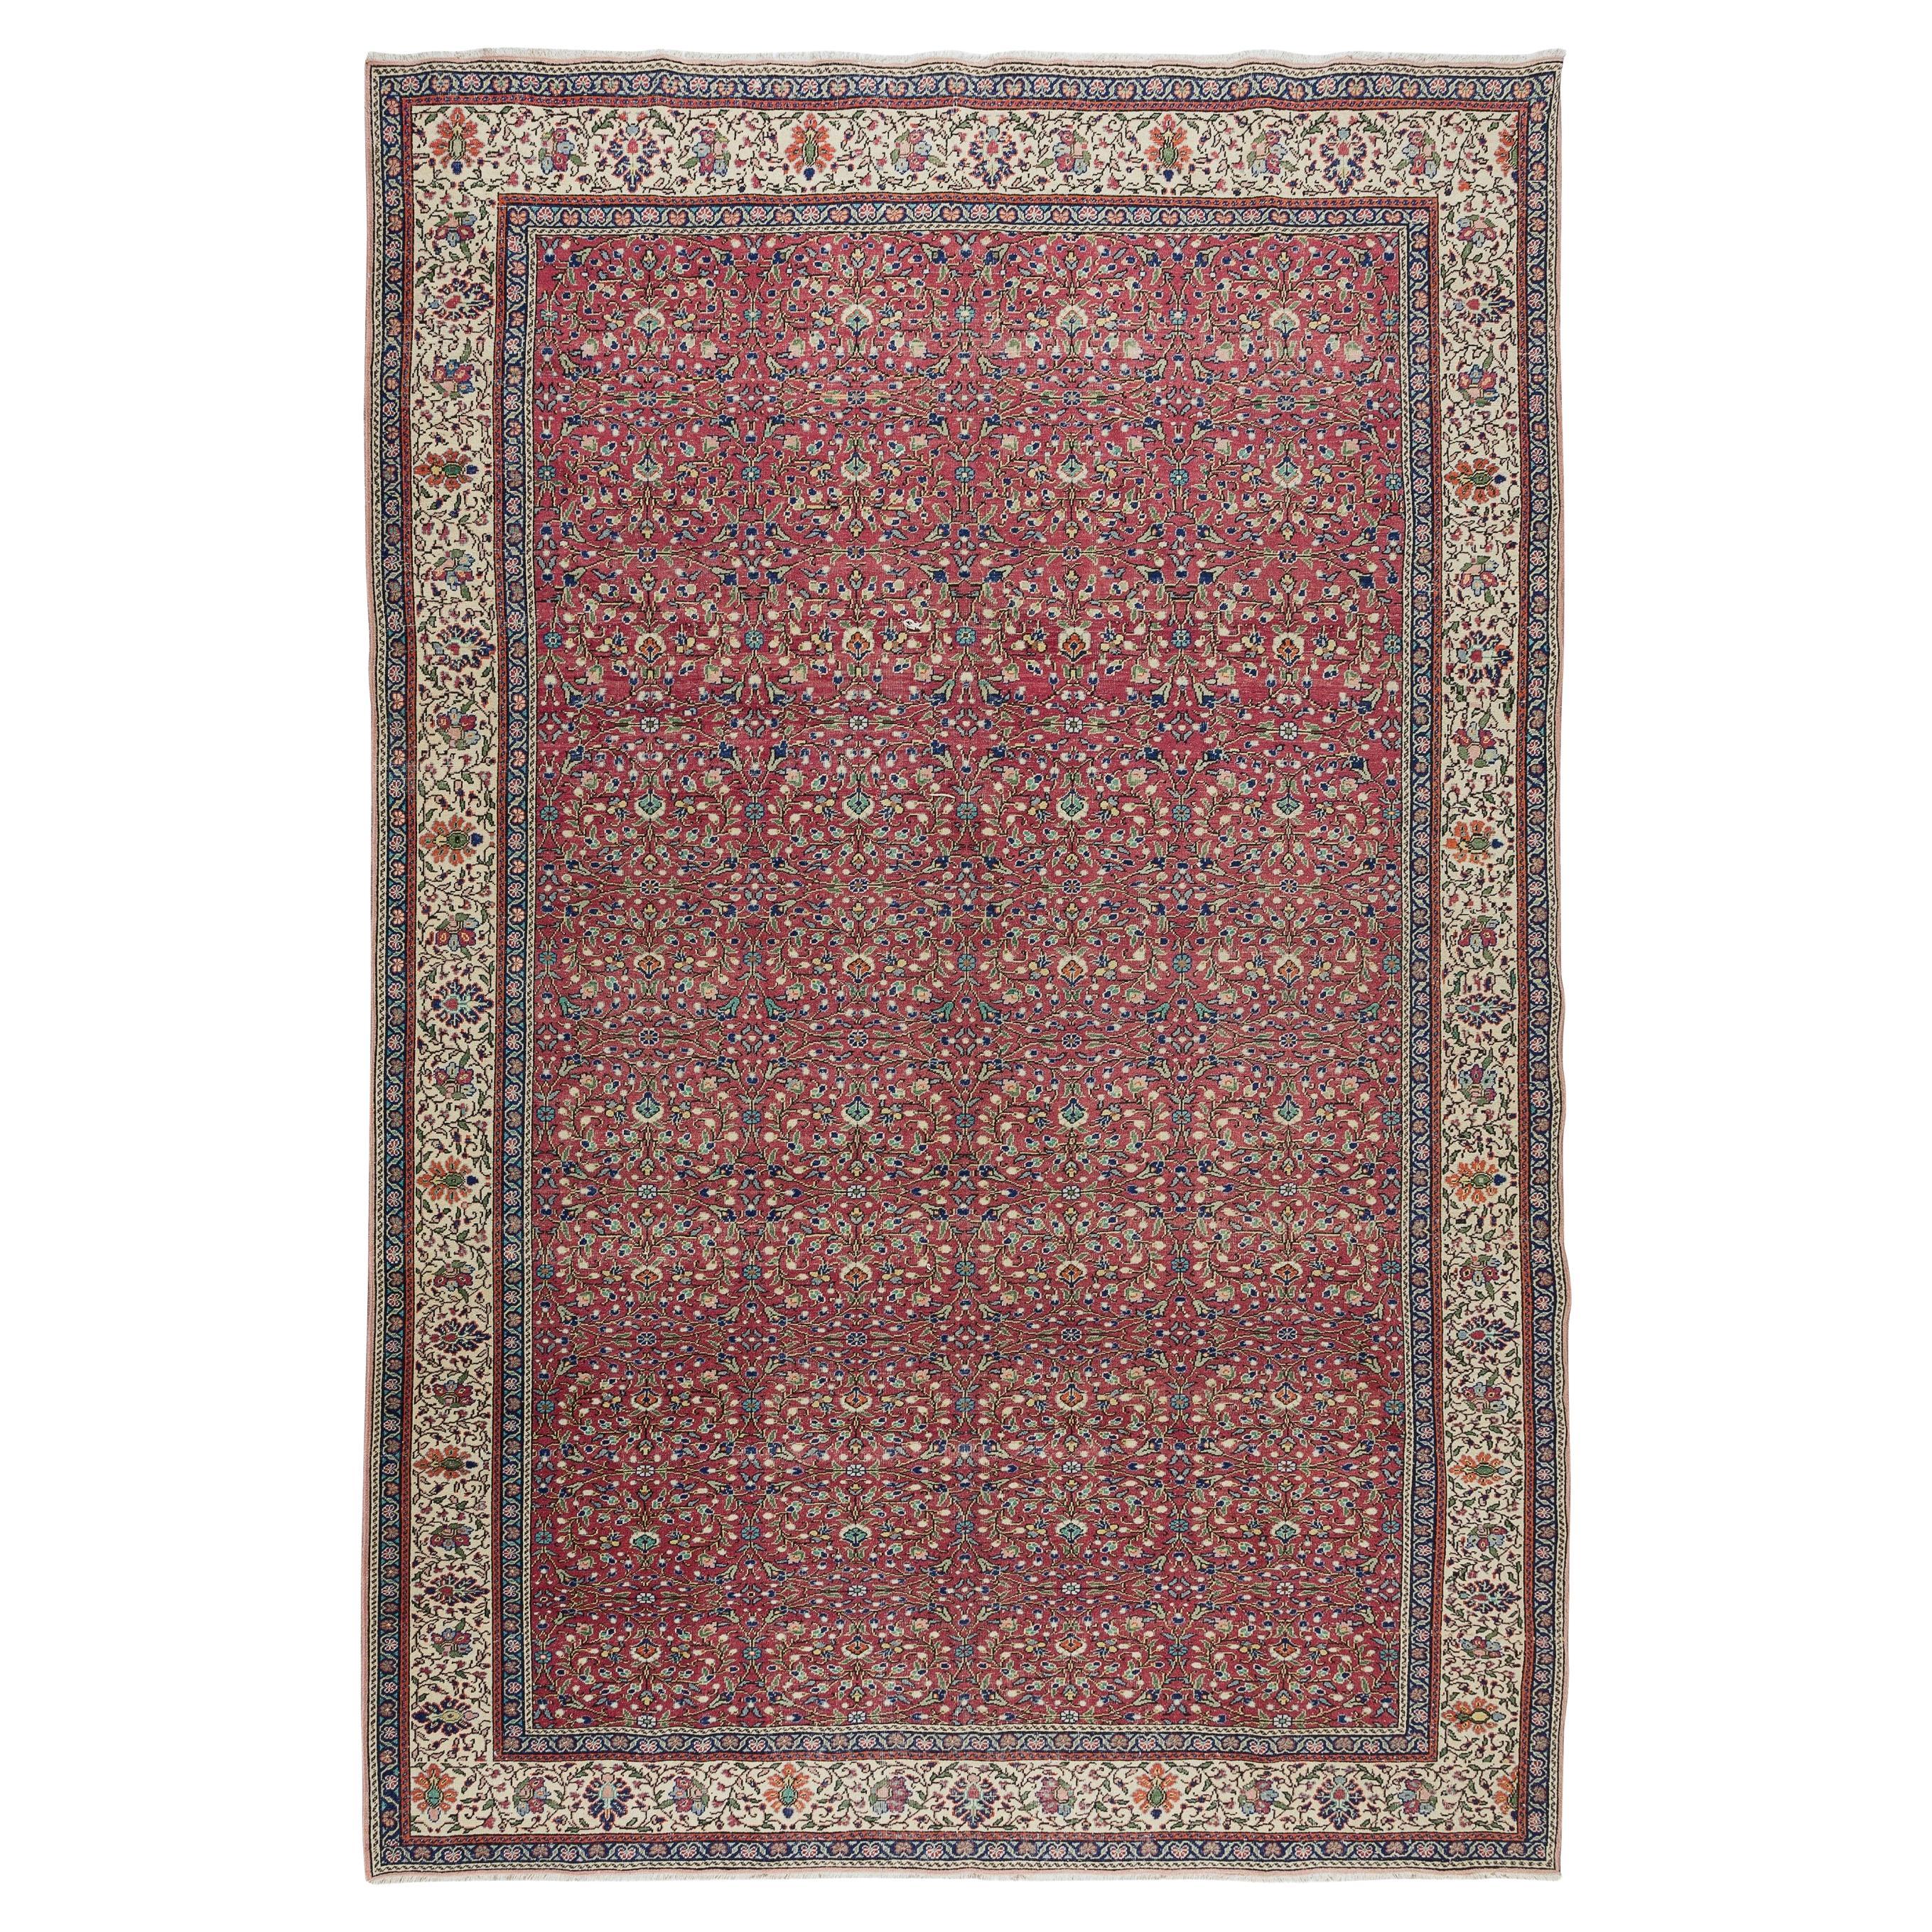 7.5x11 Ft One-of-a-kind Traditional Turkish Floral Pattern Vintage Handmade Rug For Sale